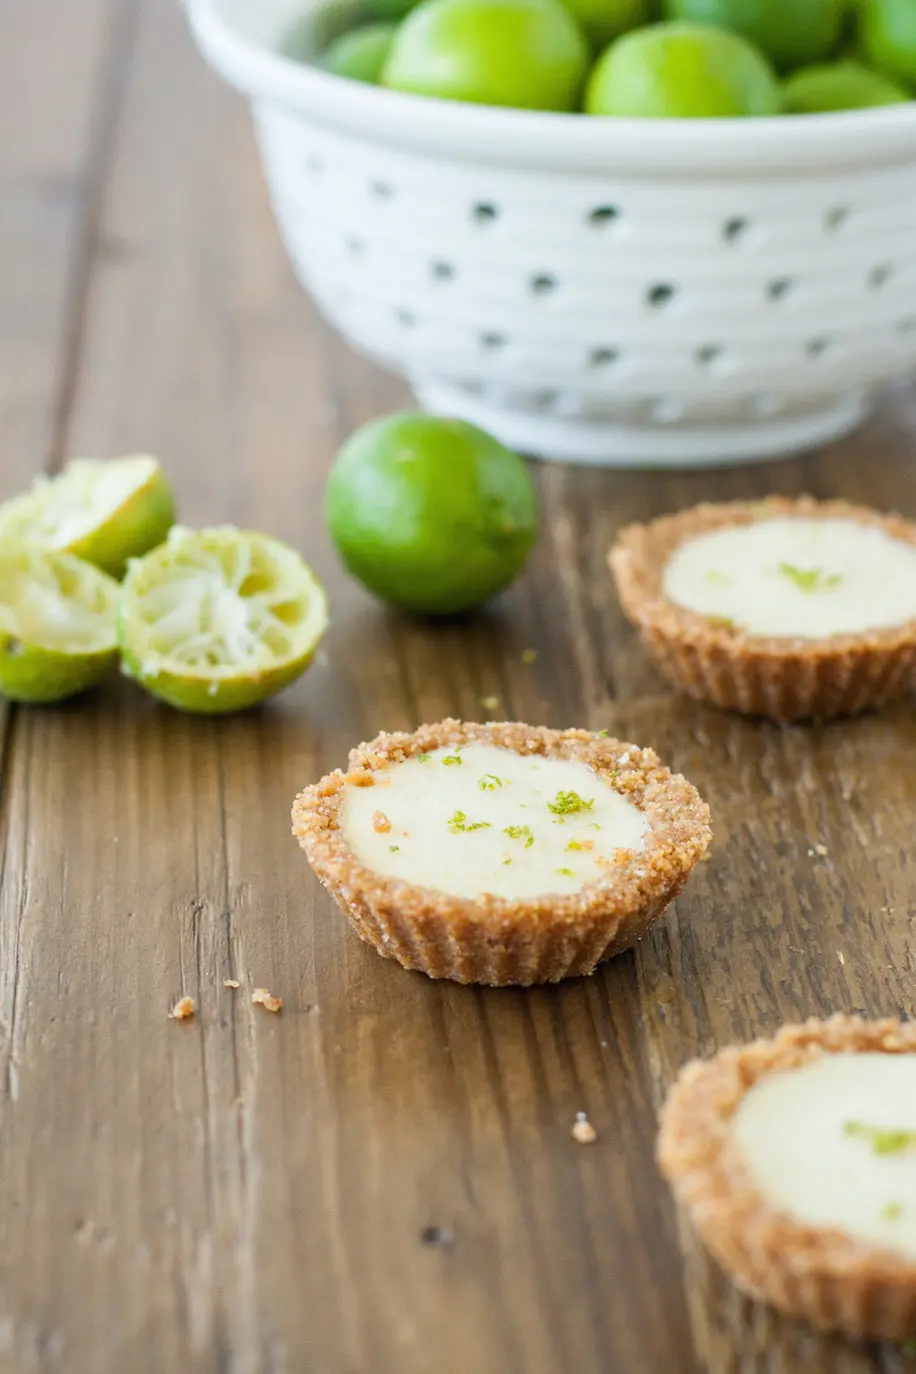 Tarts on a wooden table with limes in the background.